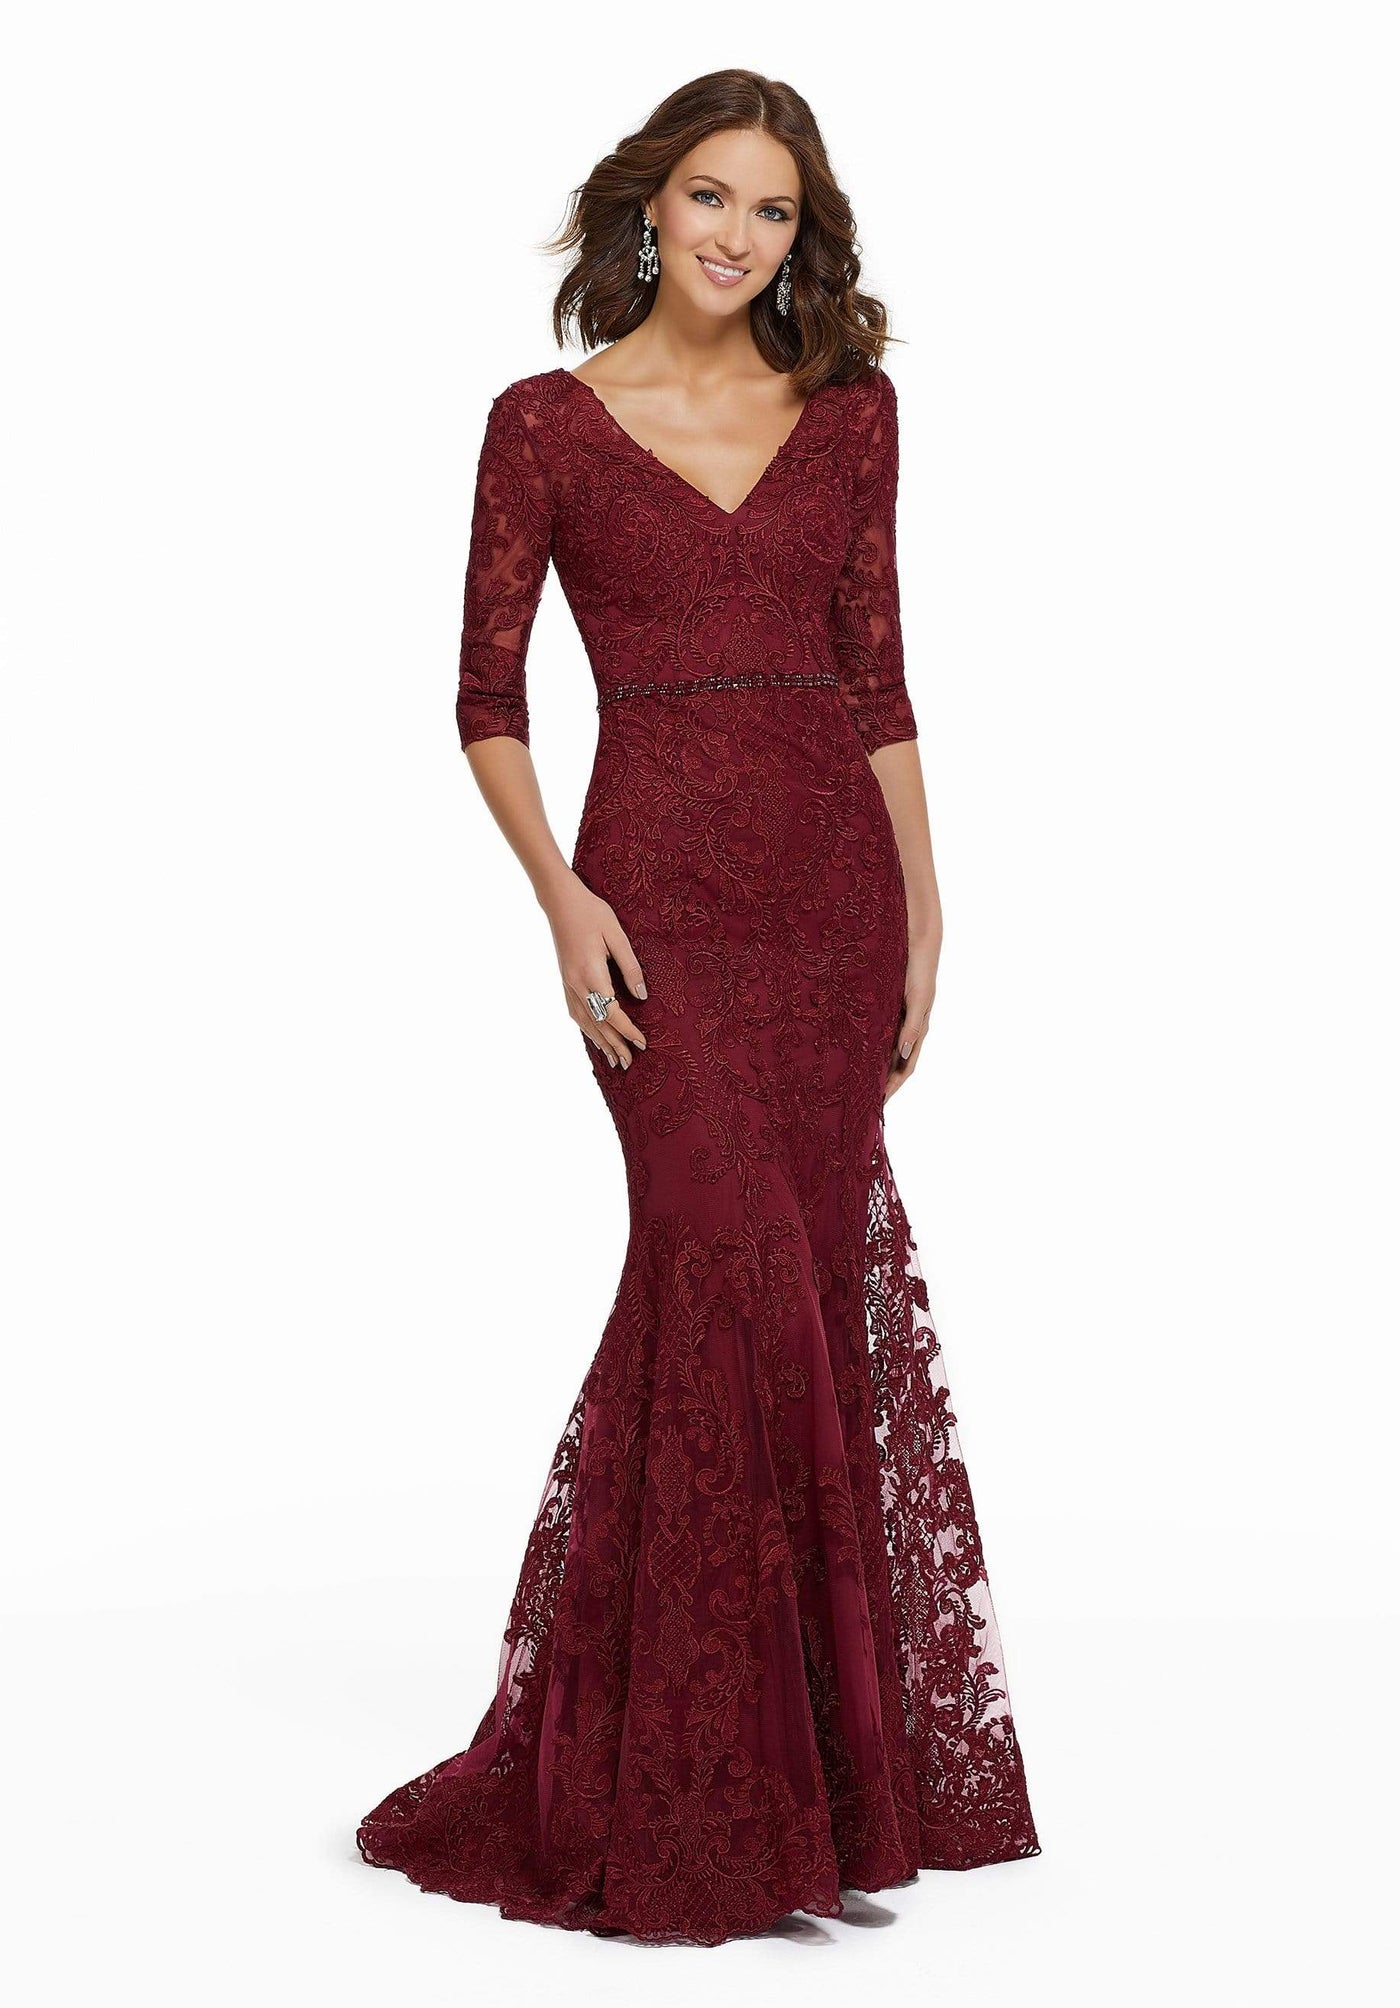 MGNY By Mori Lee - 72009 Embroidered V-Neck Mermaid Gown Mother of the Bride Dresses 0 / Wine